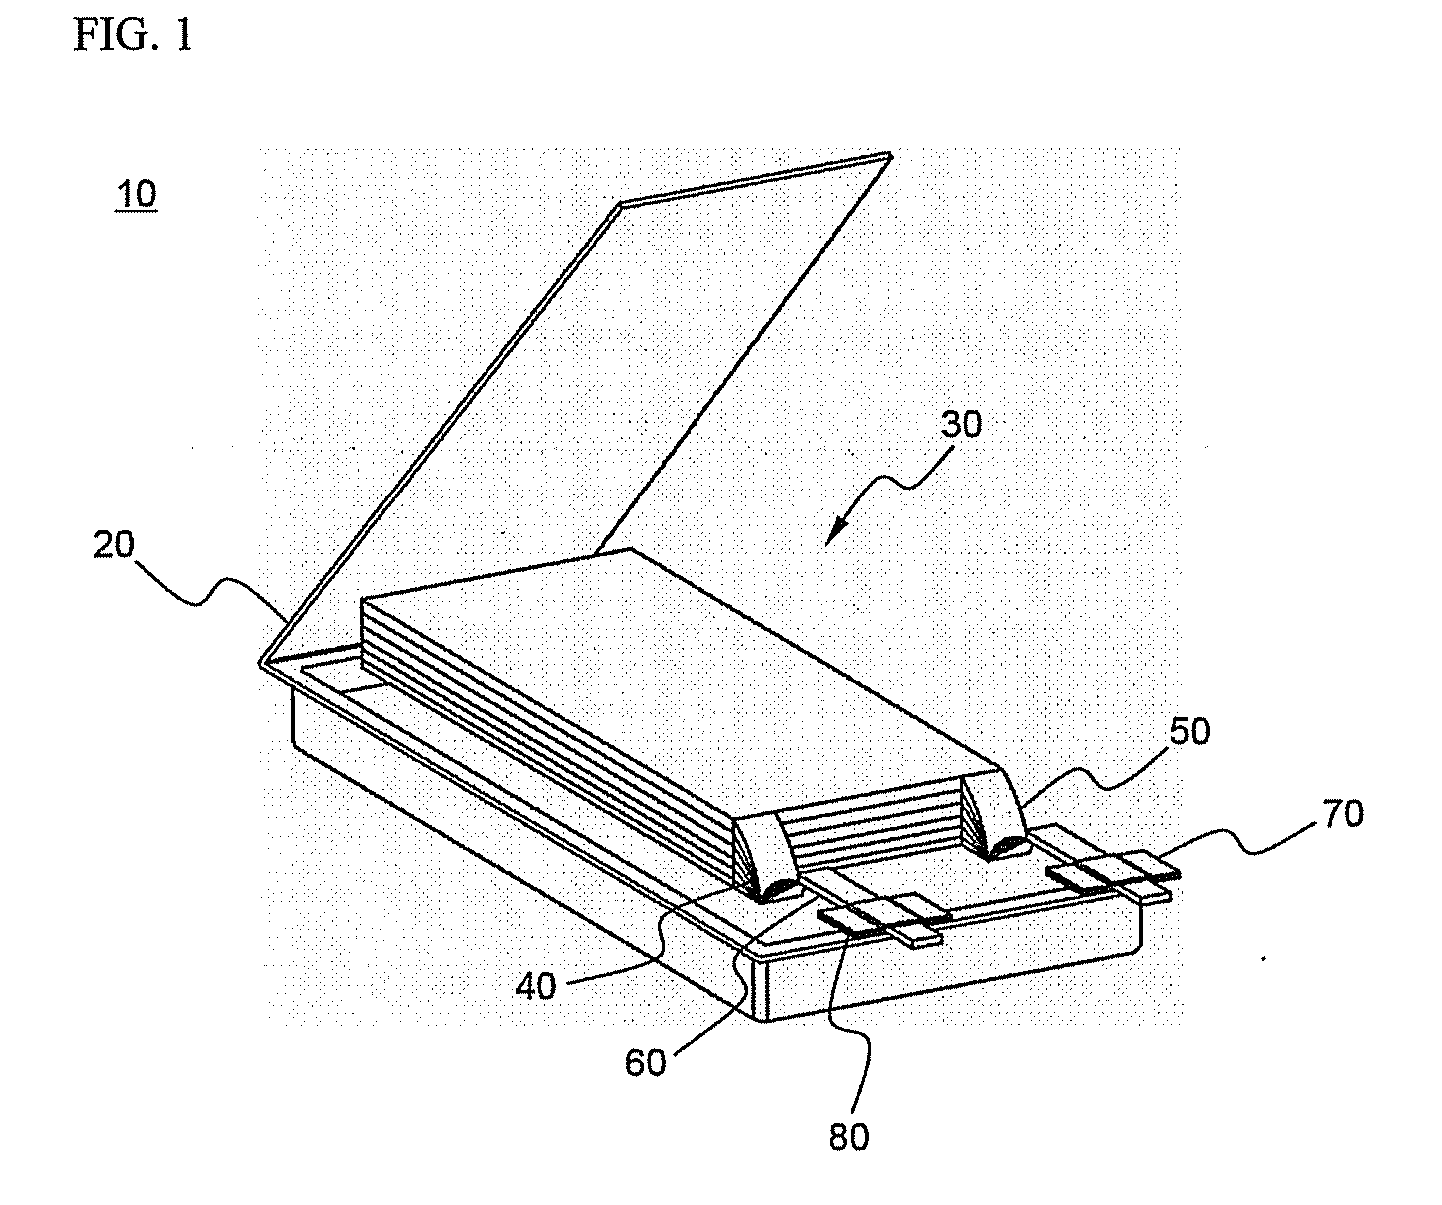 Secondary battery having electrode terminal whose position is adjustable and improved safety